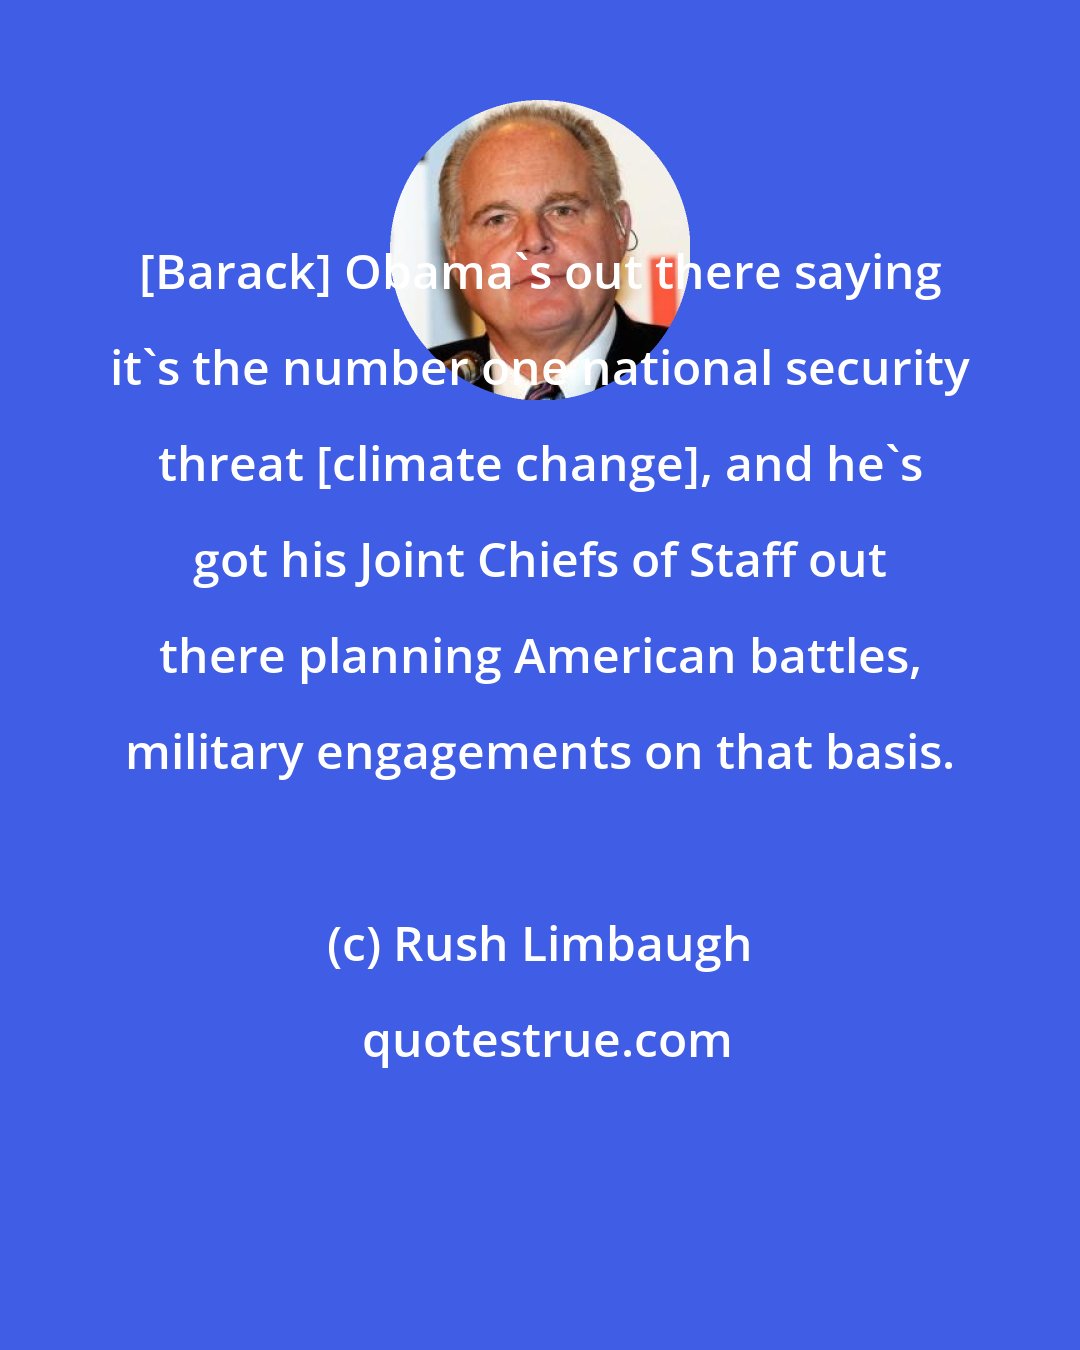 Rush Limbaugh: [Barack] Obama's out there saying it's the number one national security threat [climate change], and he's got his Joint Chiefs of Staff out there planning American battles, military engagements on that basis.